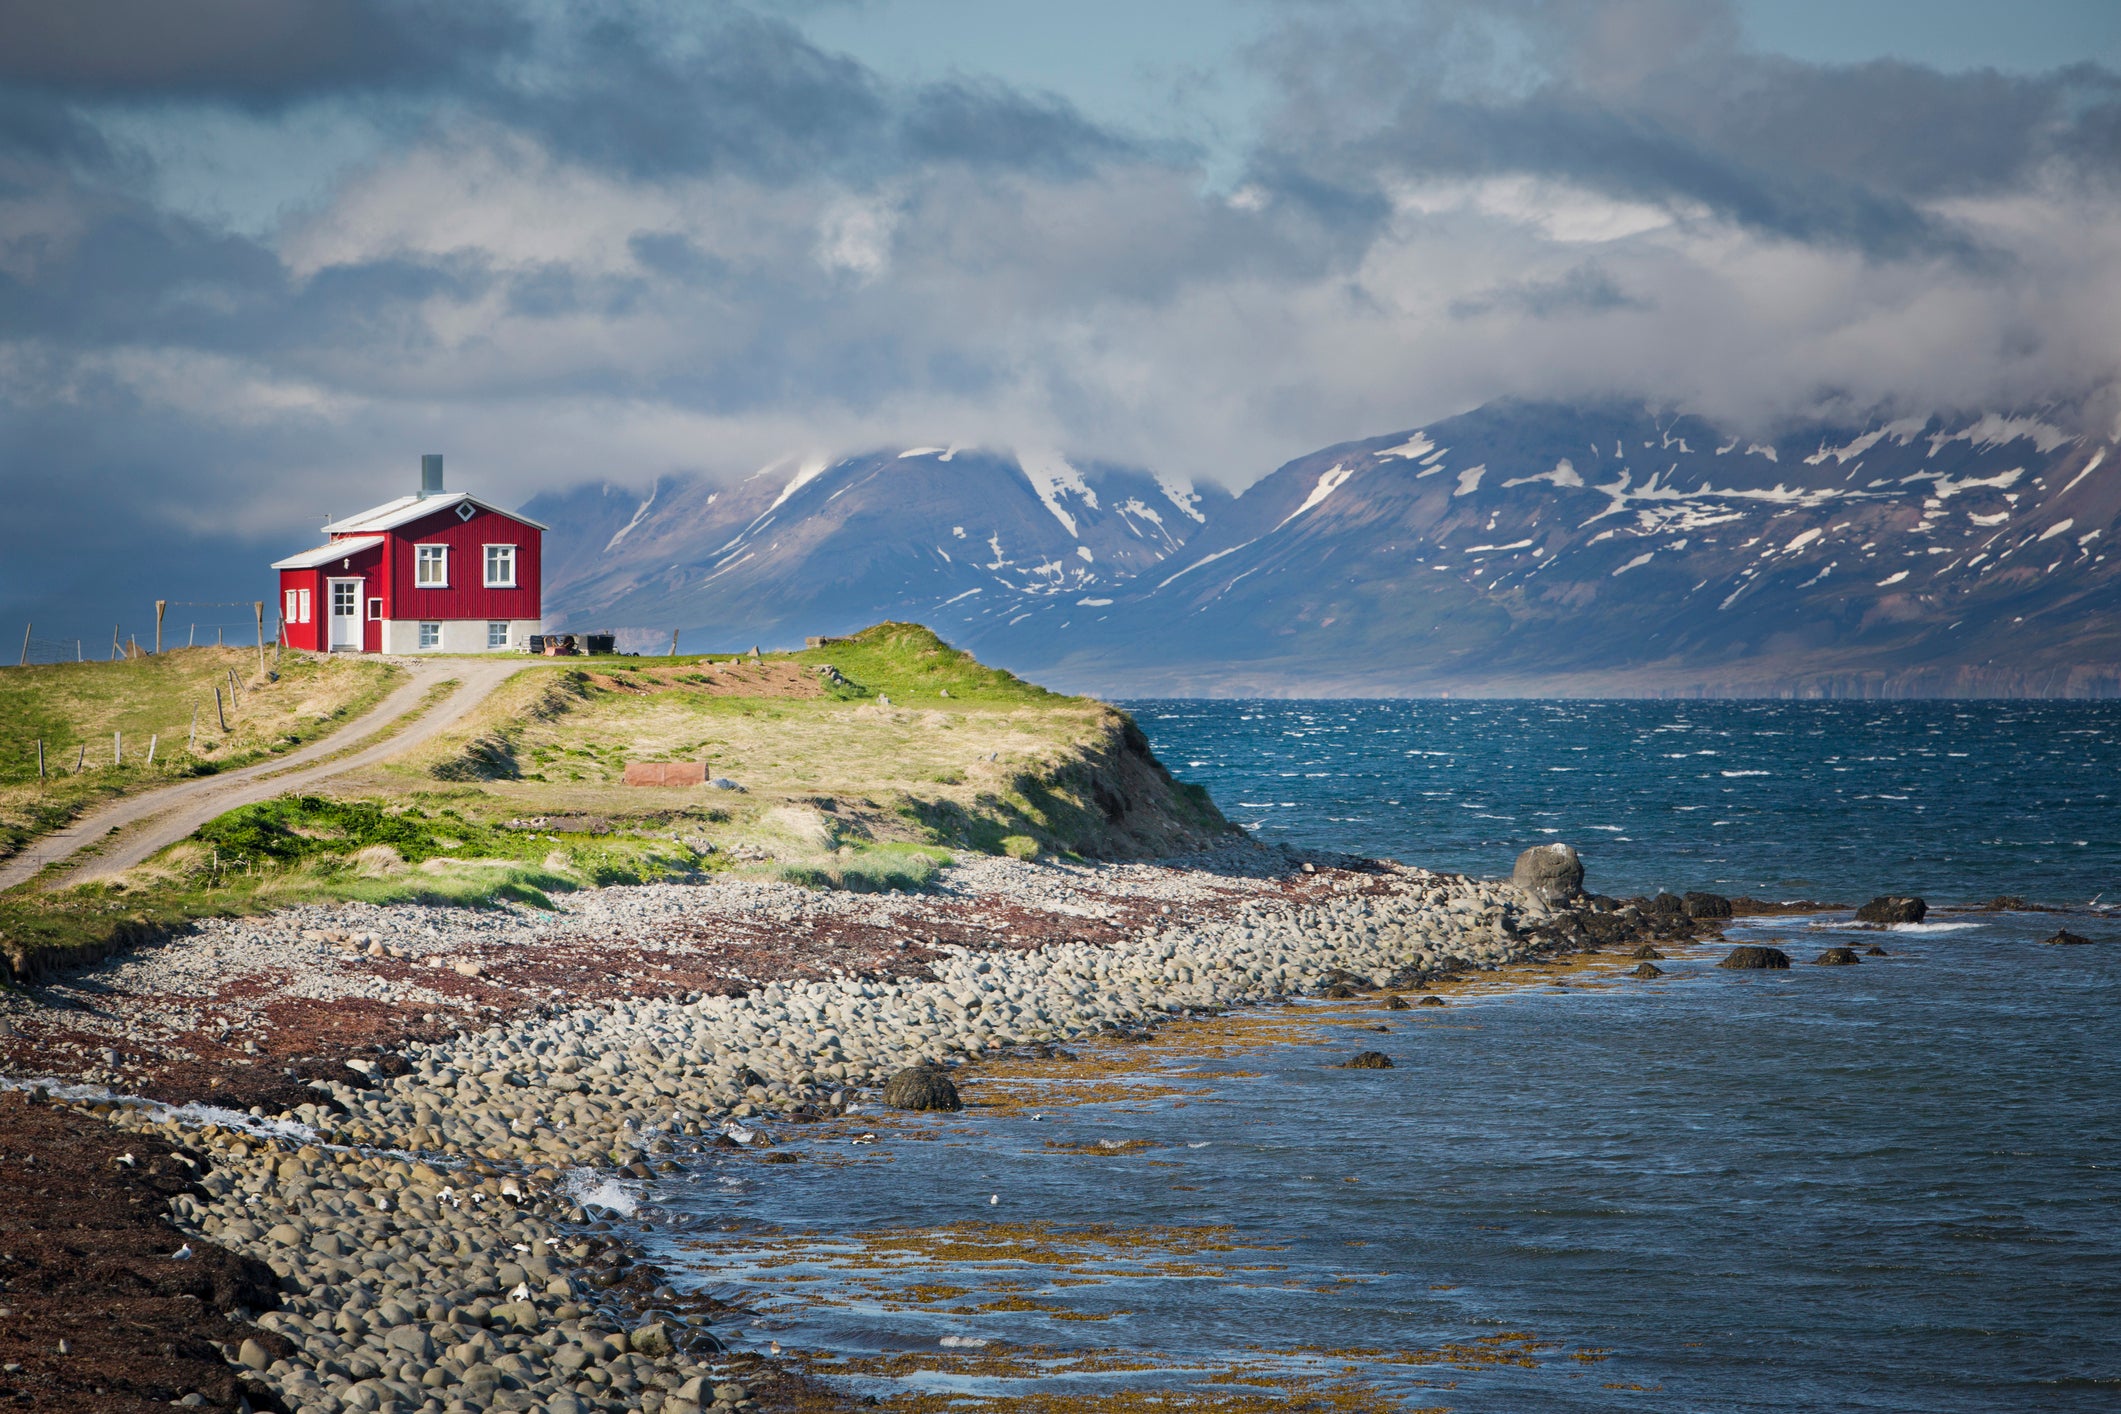 Svalbard’s landscape will start to resemble that of Iceland today, with bare rocks surrounded by grass, mosses and shrubs